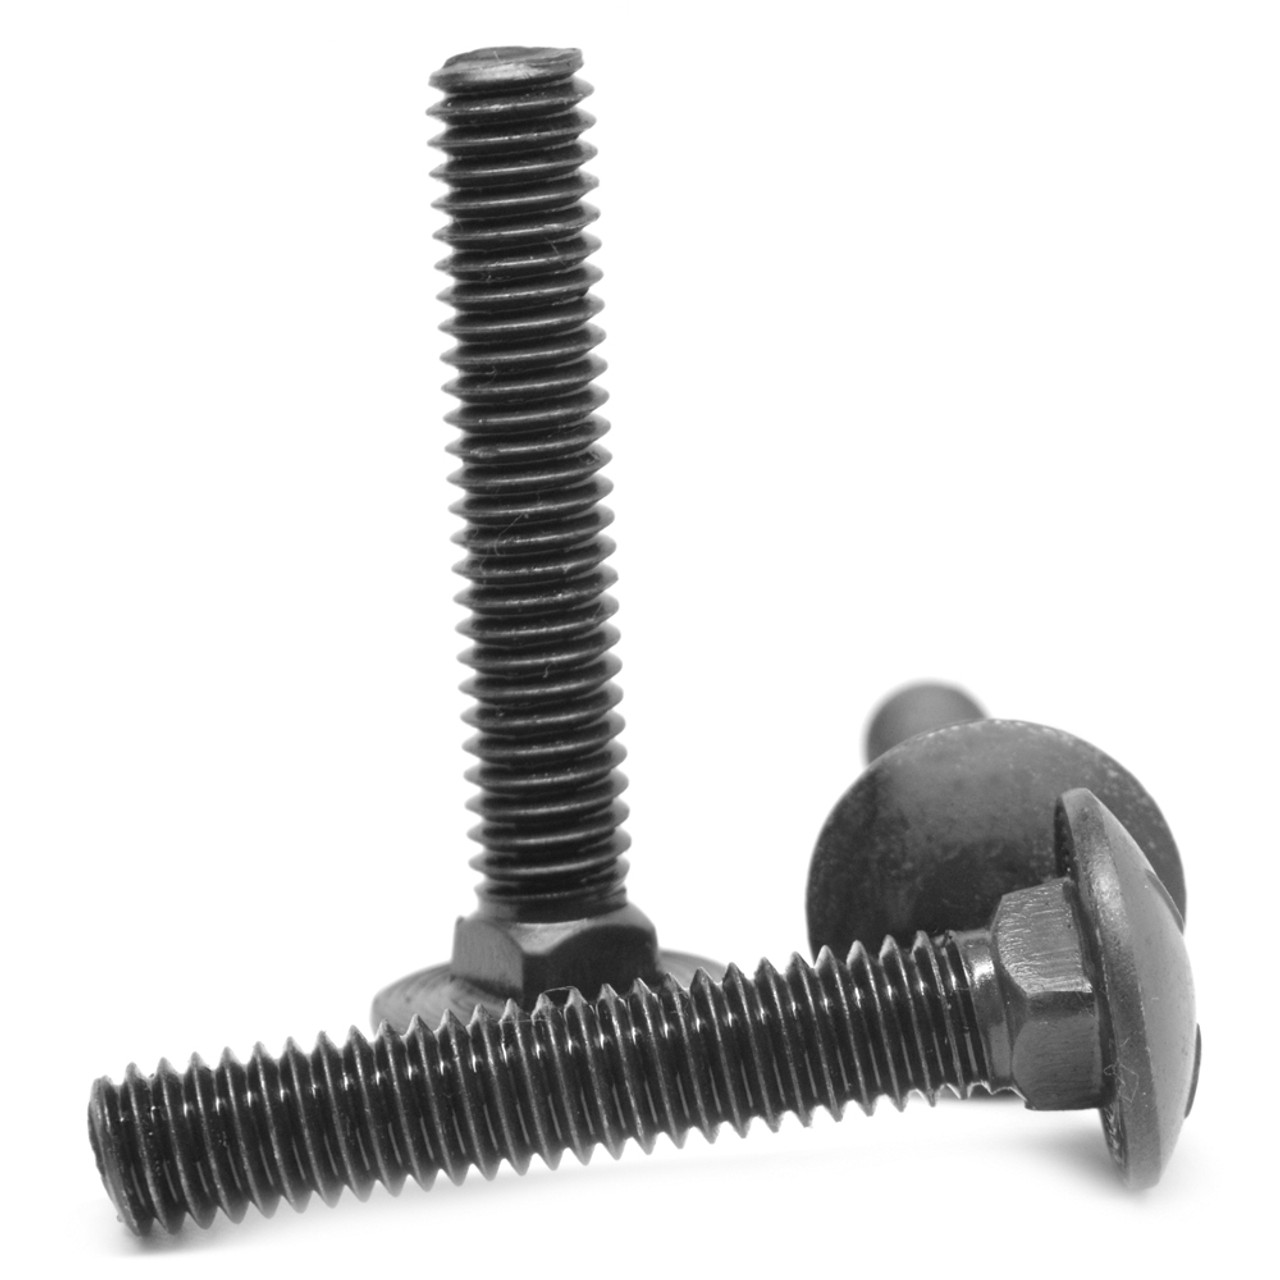 1/2-13 x 2 Coarse Thread Carriage Bolt Low Carbon Steel Black Oxide